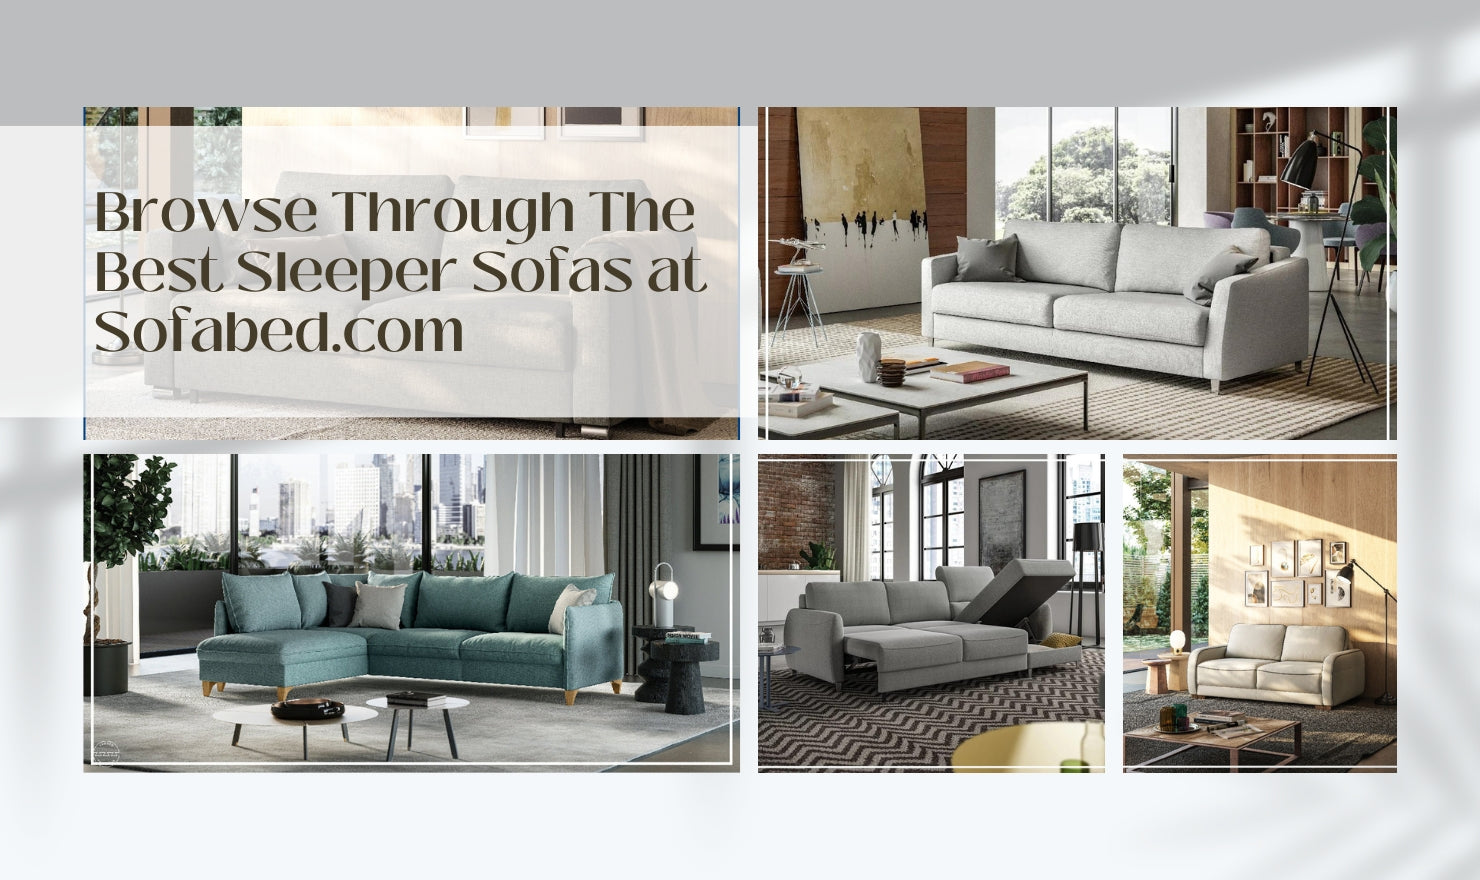 Browse Through The Best Sleeper Sofas at Sofabed.com